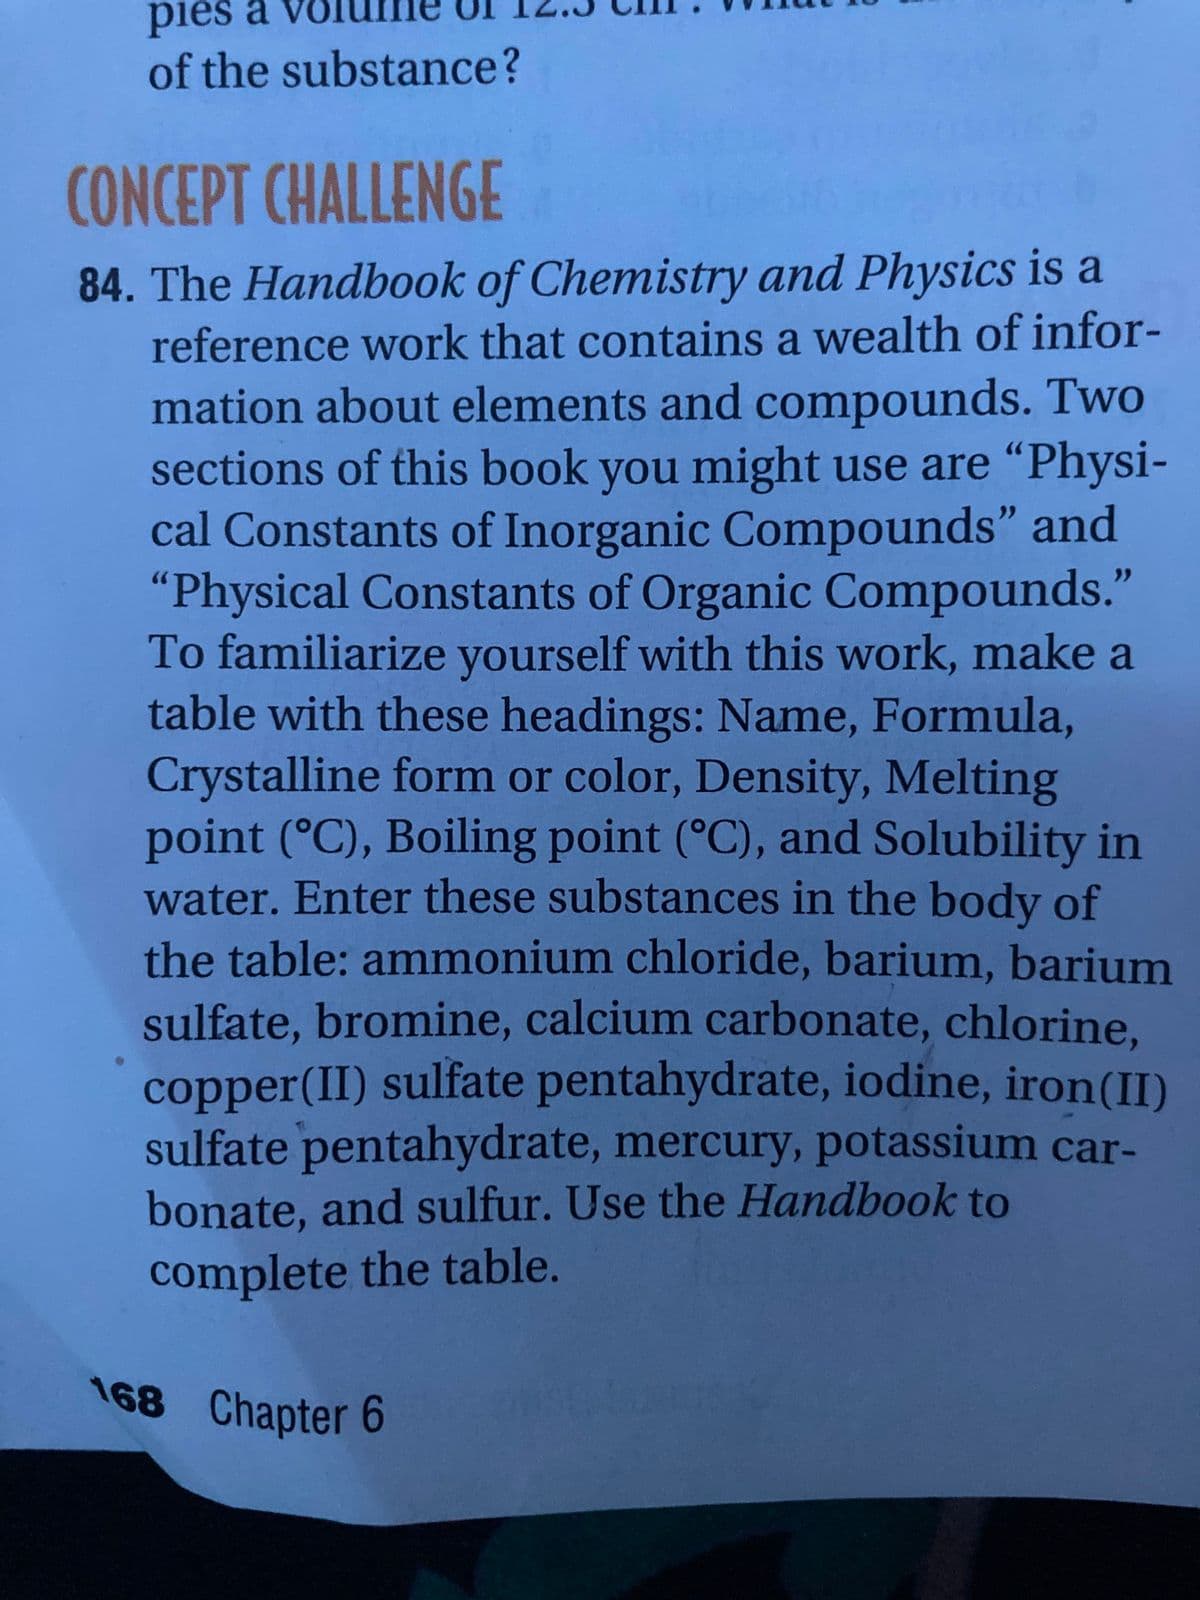 pies
of the substance?
CONCEPT CHALLENGE
84. The Handbook of Chemistry and Physics is a
reference work that contains a wealth of infor-
mation about elements and compounds. Two
sections of this book you might use are "Physi-
cal Constants of Inorganic Compounds" and
"Physical Constants of Organic Compounds."
To familiarize yourself with this work, make a
table with these headings: Name, Formula,
Crystalline form or color, Density, Melting
point (°C), Boiling point (°C), and Solubility in
water. Enter these substances in the body of
the table: ammonium chloride, barium, barium
sulfate, bromine, calcium carbonate, chlorine.
copper(II) sulfate pentahydrate, iodine, iron(II)
sulfate pentahydrate, mercury, potassium car-
bonate, and sulfur. Use the Handbook to
complete the table.
168 Chapter 6
